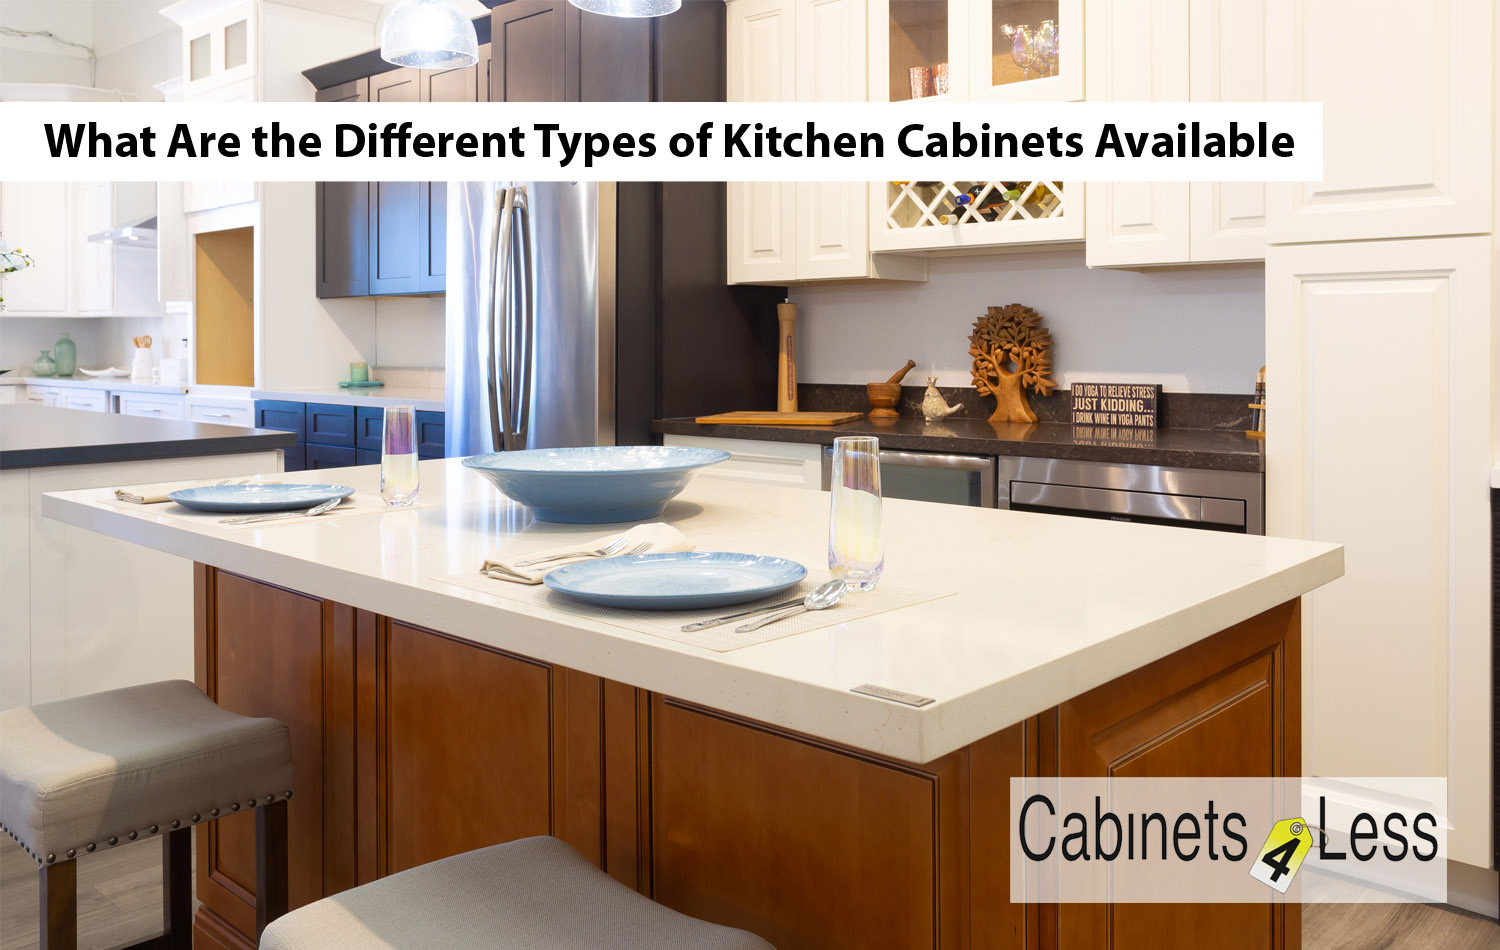 What Are the Different Types of Kitchen Cabinets Available